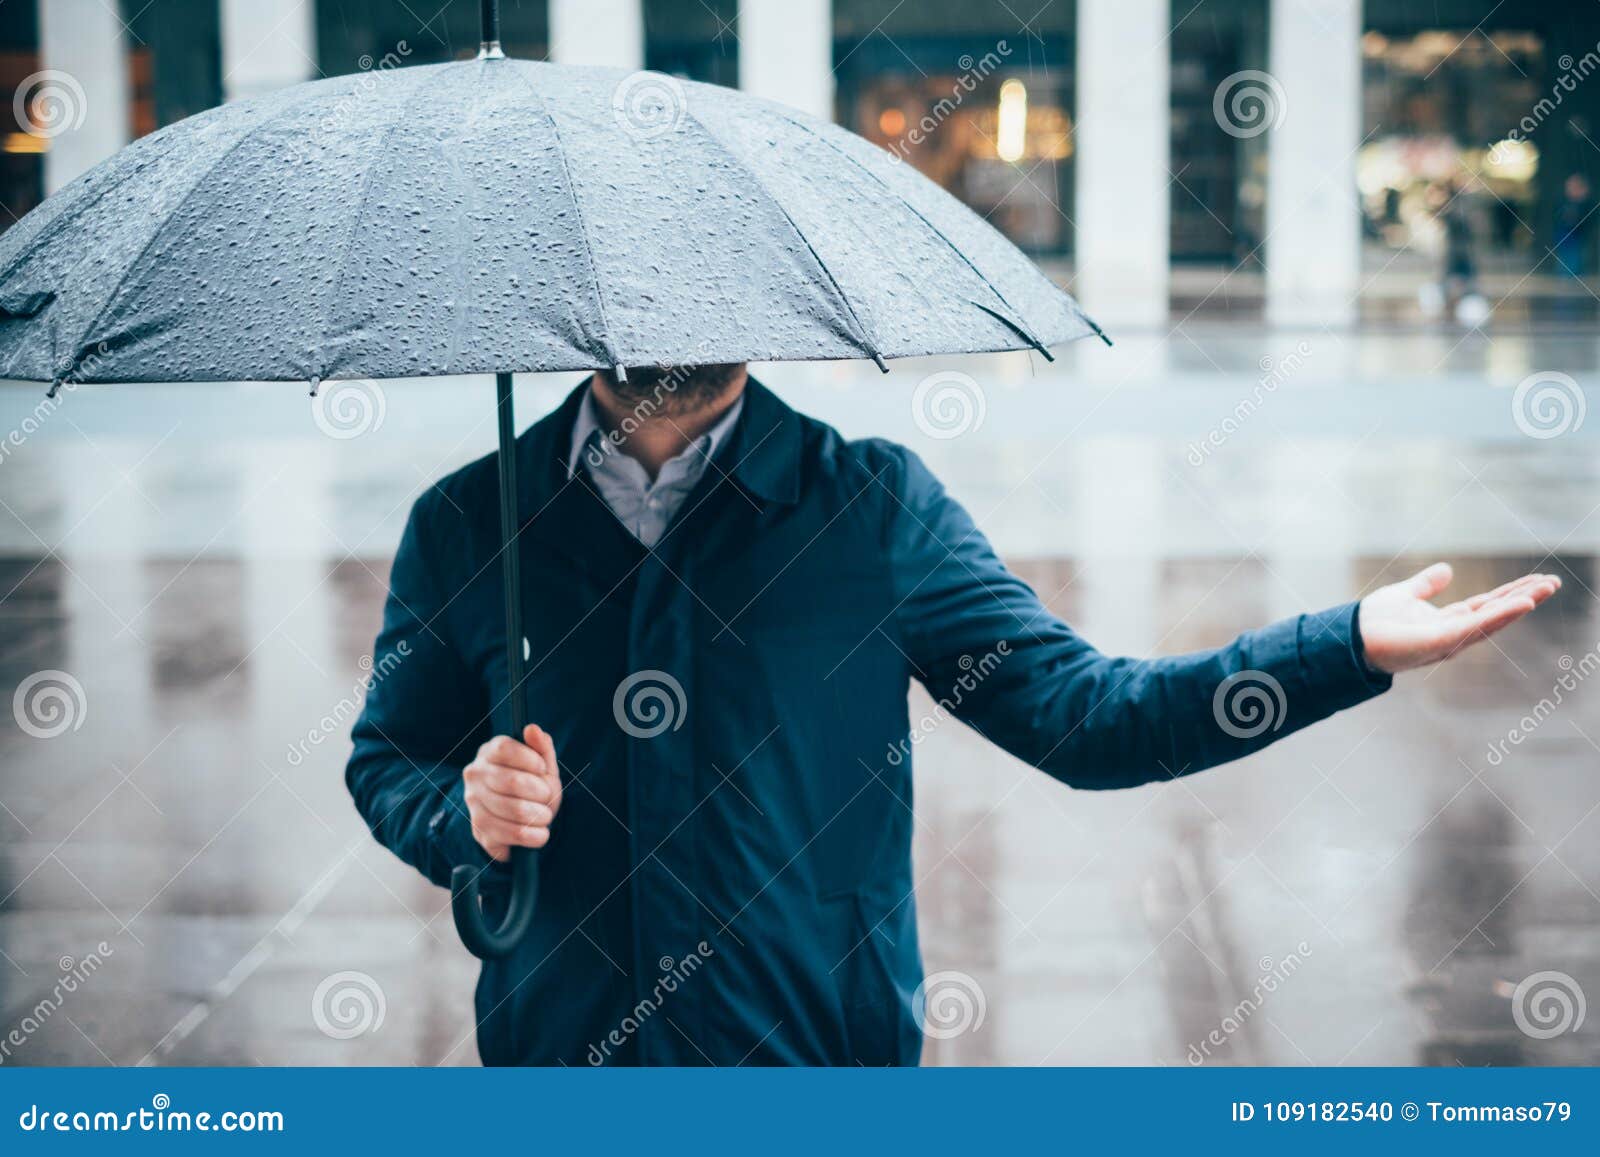 Man Walking in the City with Umbrella on Rainy Day Stock Photo ...